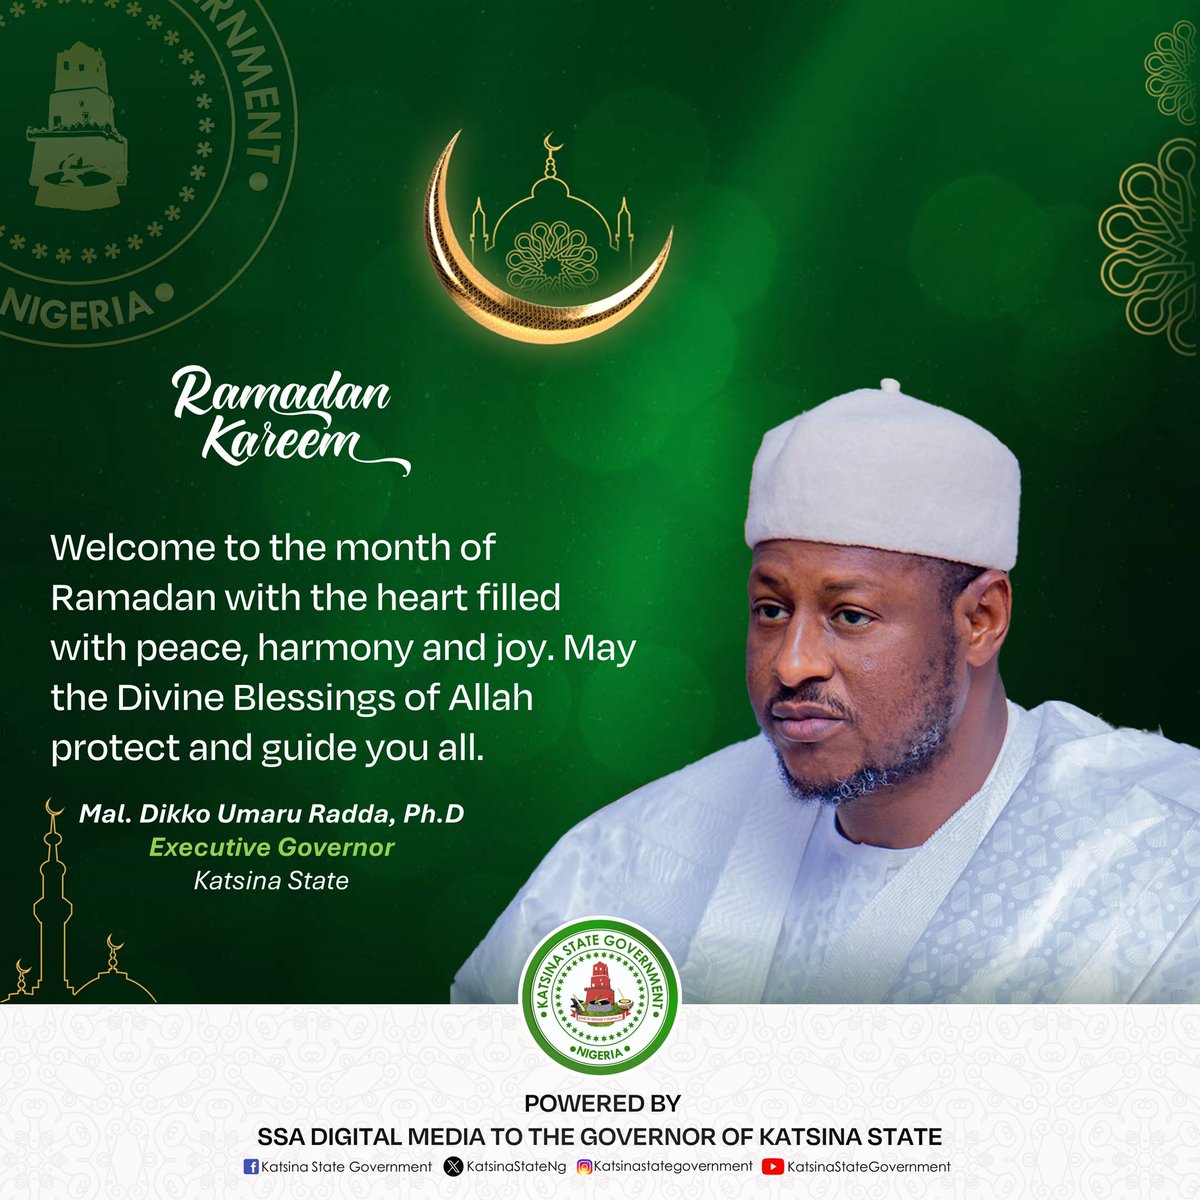 As the blessed month of Ramadan dawns upon us, I extend heartfelt greetings to the resilient people of Katsina State. Ramadan is a time of spiritual reflection, devotion, and compassion—a period where we draw closer to our faith and seek the blessings of Allah. During this